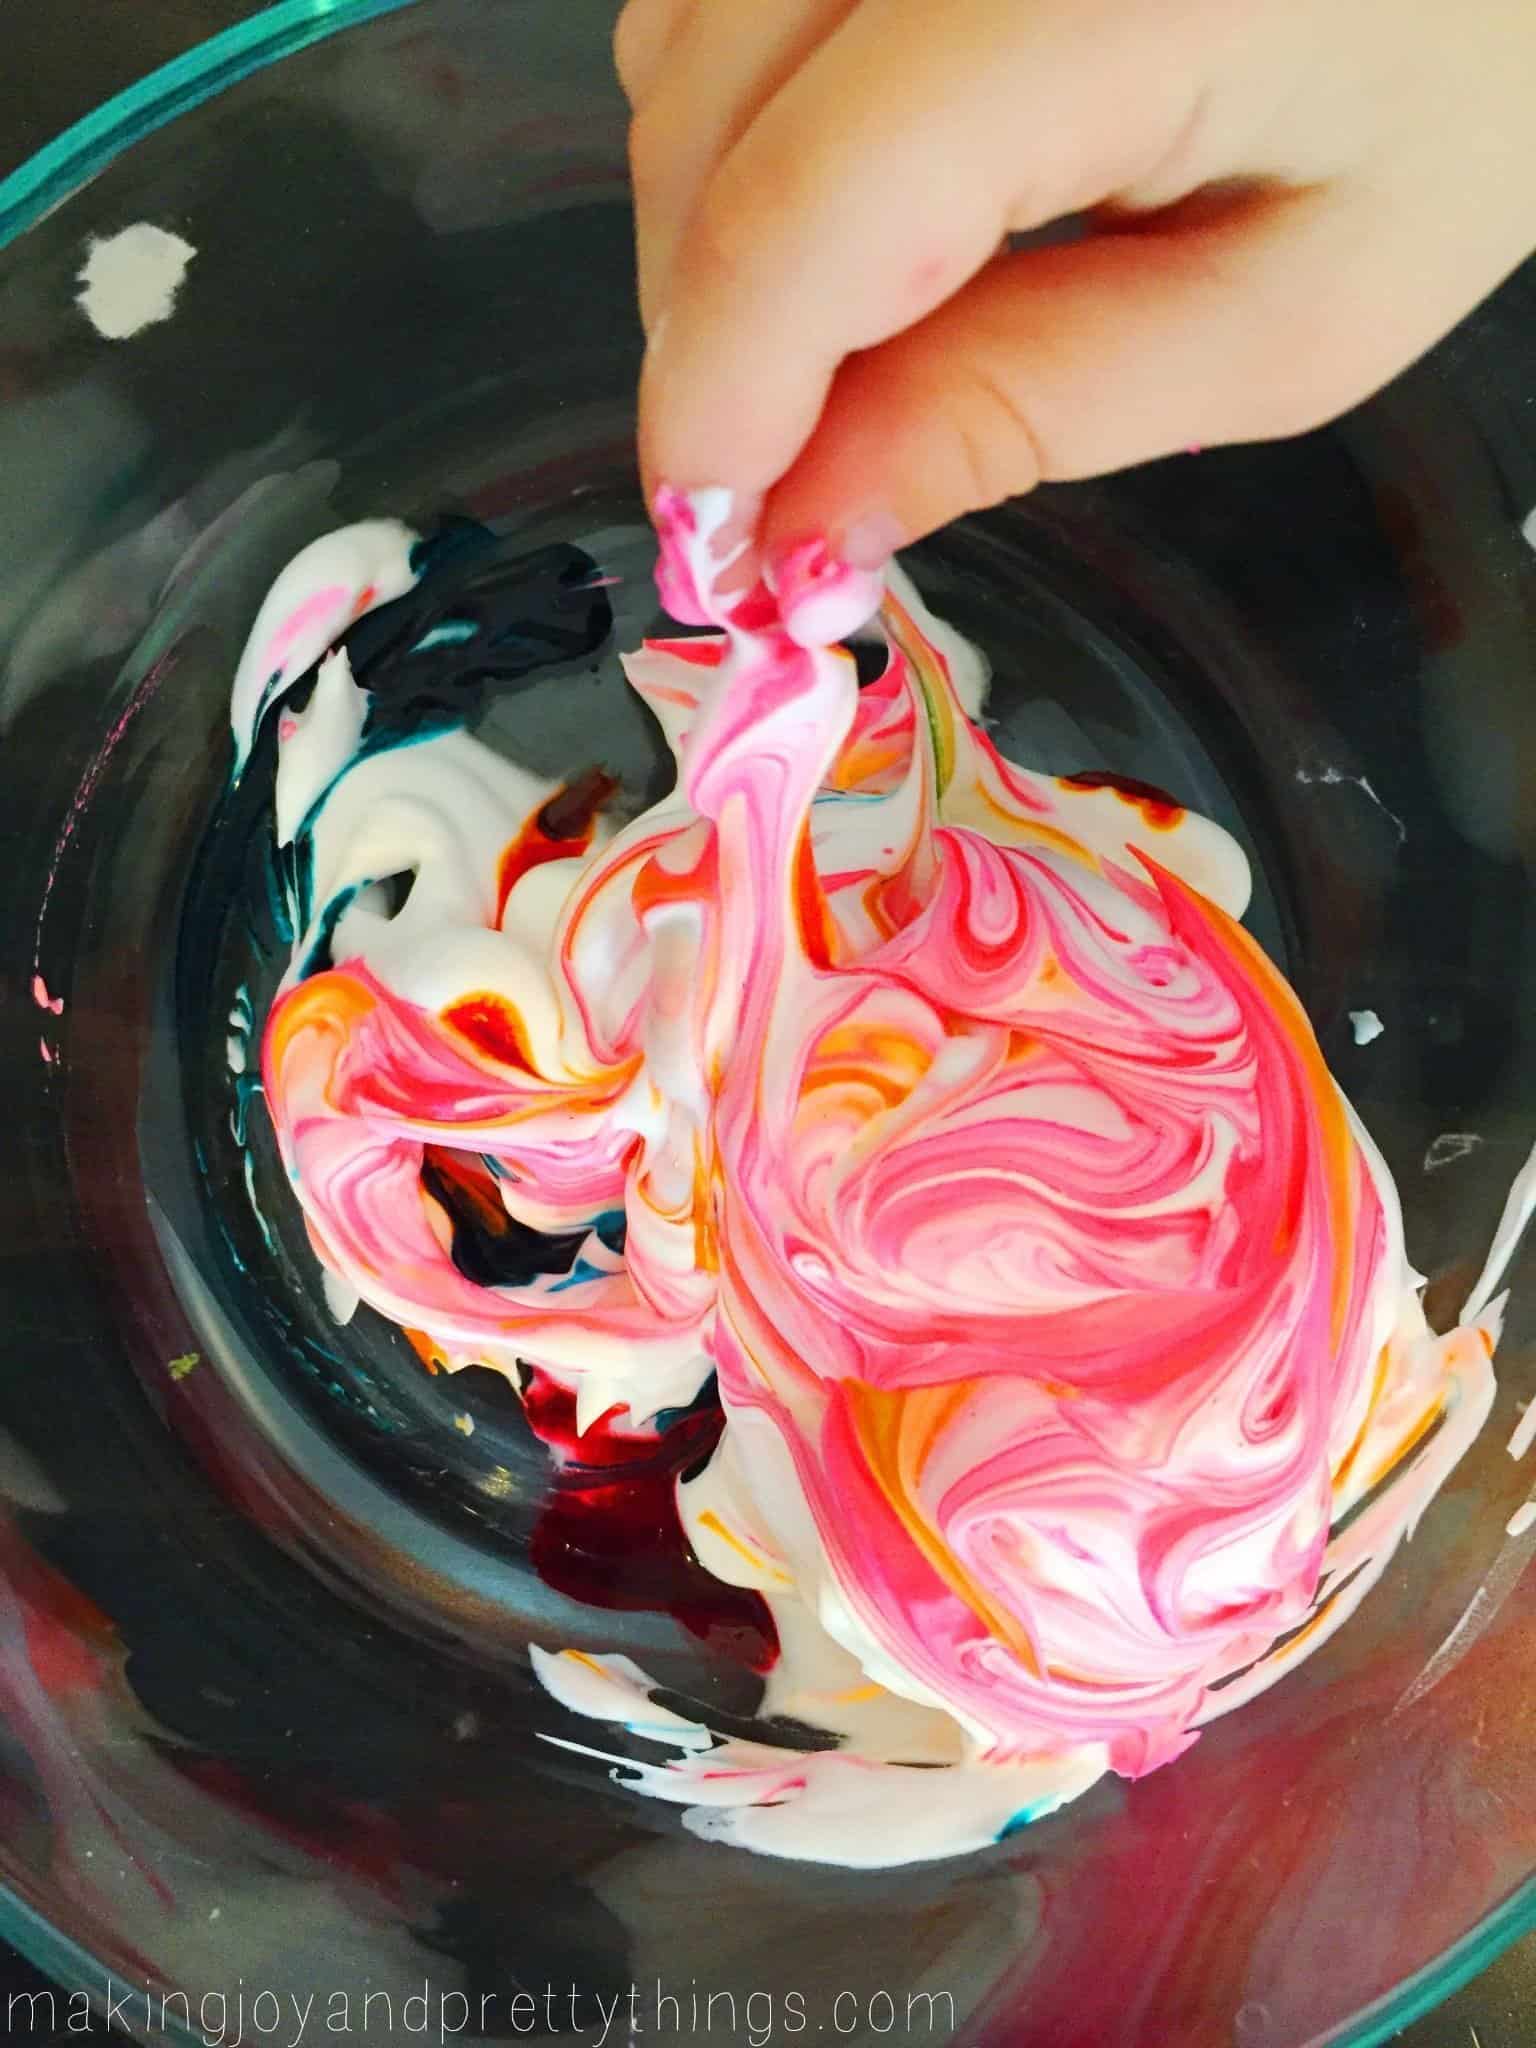 Fun, easy DIY shaving cream Easter eggs, perfect for those younger kiddos.